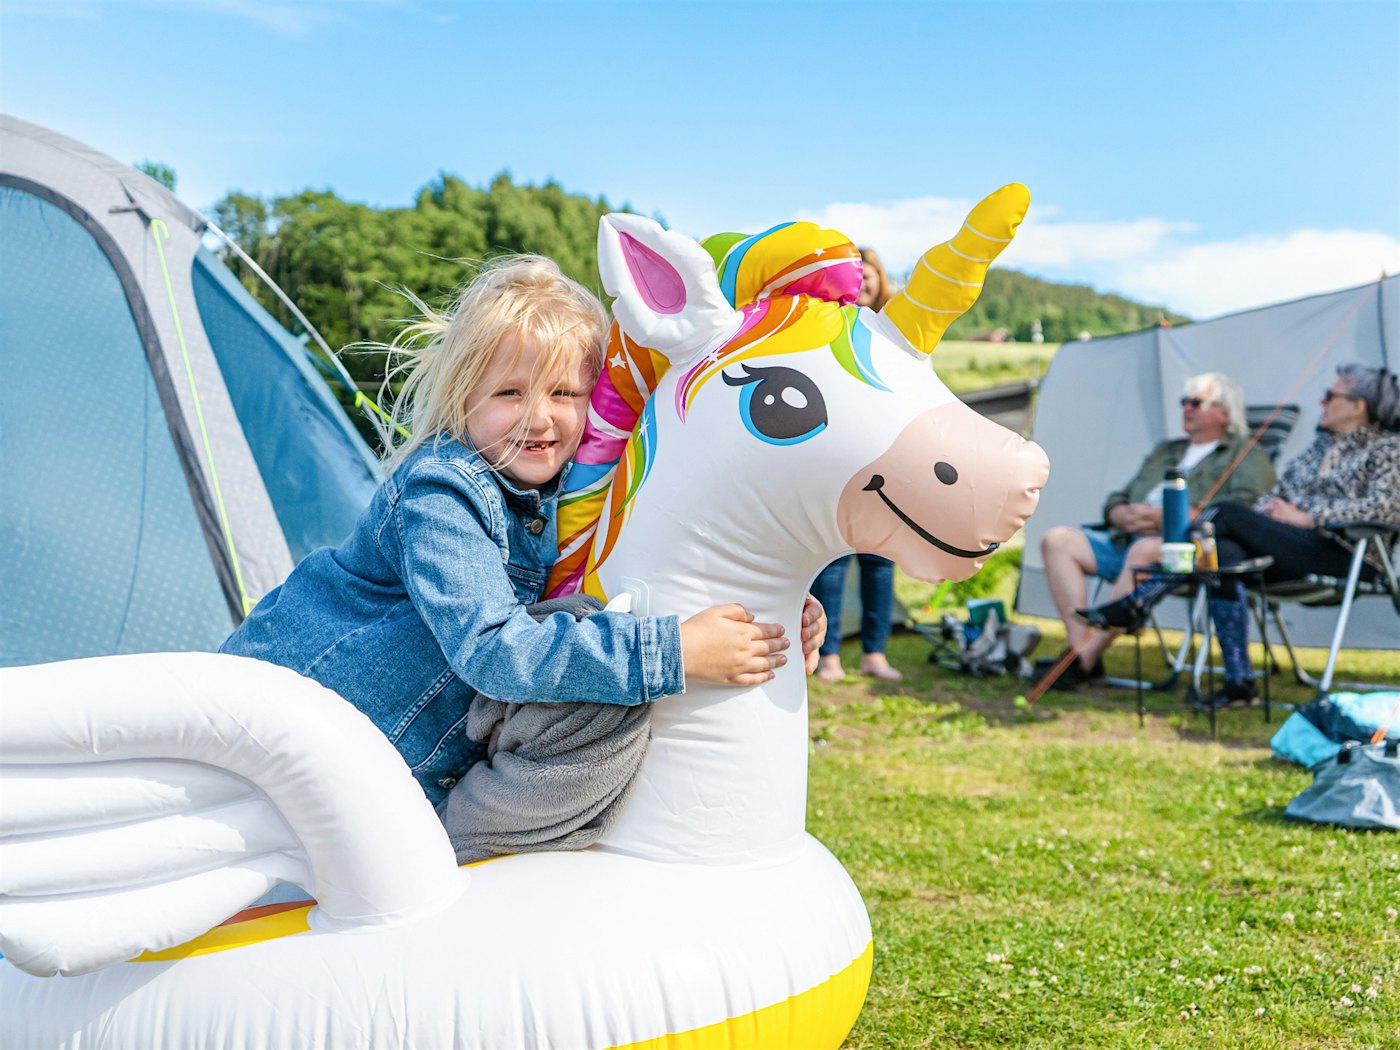 Girl sits on a unicorn bath toy and smiles. Caravan and tent in the background. Photo